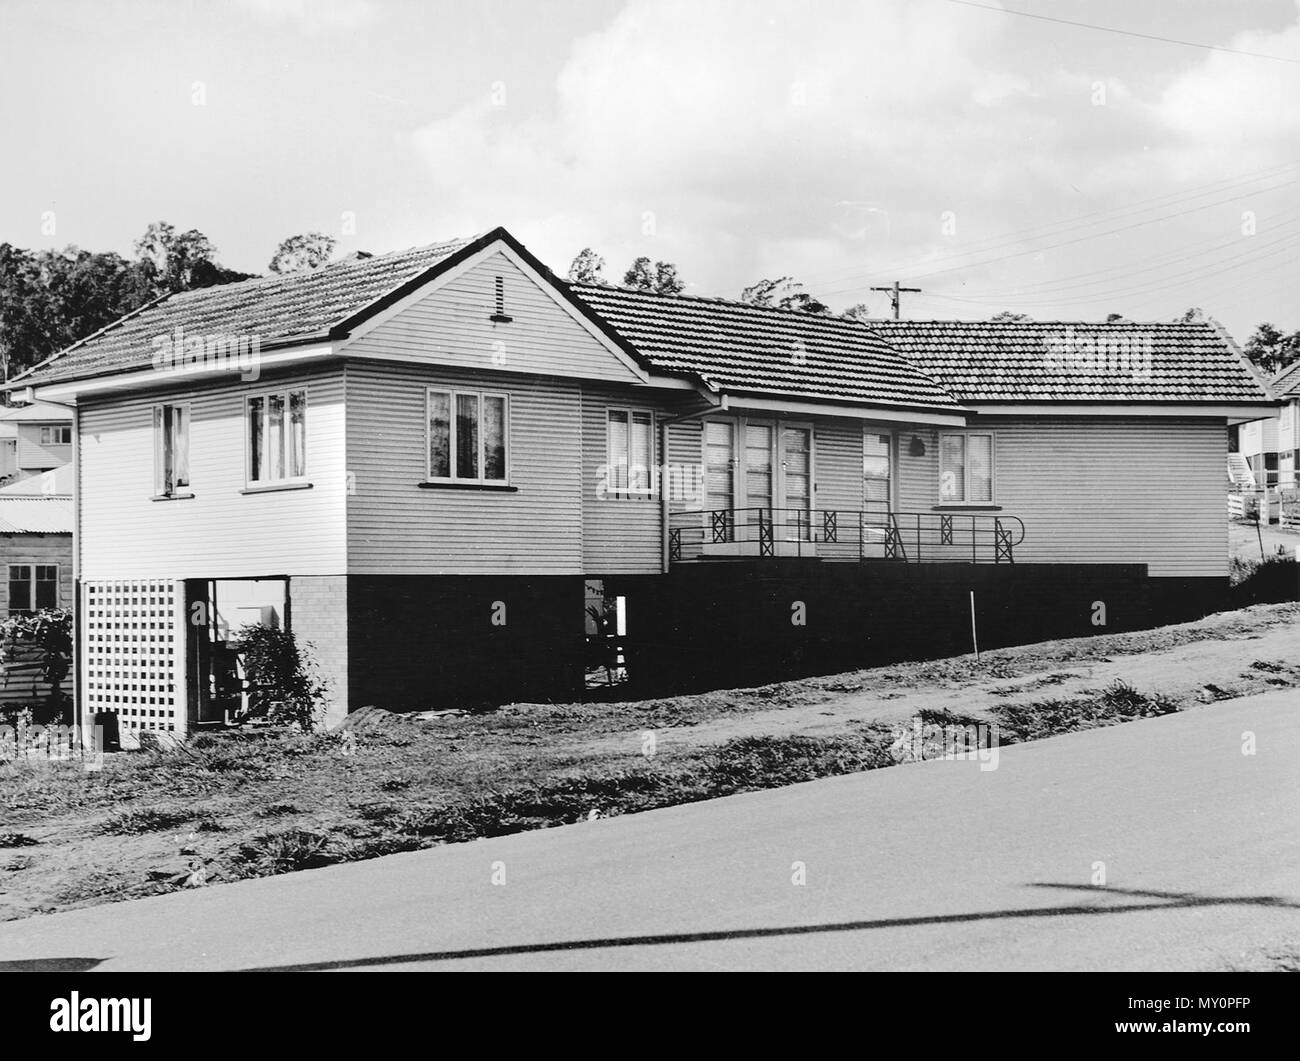 Queensland Housing Commission dwelling, Tarragindi, Brisbane, c 1954. The Telegraph 11 July 1946  State Has 1,333 Building Blocks 188730456 )   Up to June 30 last the Queensland Housing Commission had acquired land totalling 1,333 building allotments in Brisbane, the Minister for Works and Housing (Mr Bruce) announced today.  The lands were located as follows: Ashgrove, 99 allotments; Banyo, 11; Camp Hill, 17; Cannon Hill, 11; Chermside-Wavell Heights, 261; Coorparoo, 187; Corinda-Graceville, 20; Enoggera-Gaythorne-Mitchelton, 228; Fairfield-Yeronga, 25, Indooroopilly-Taringa, 22; Kedron, 20;  Stock Photo